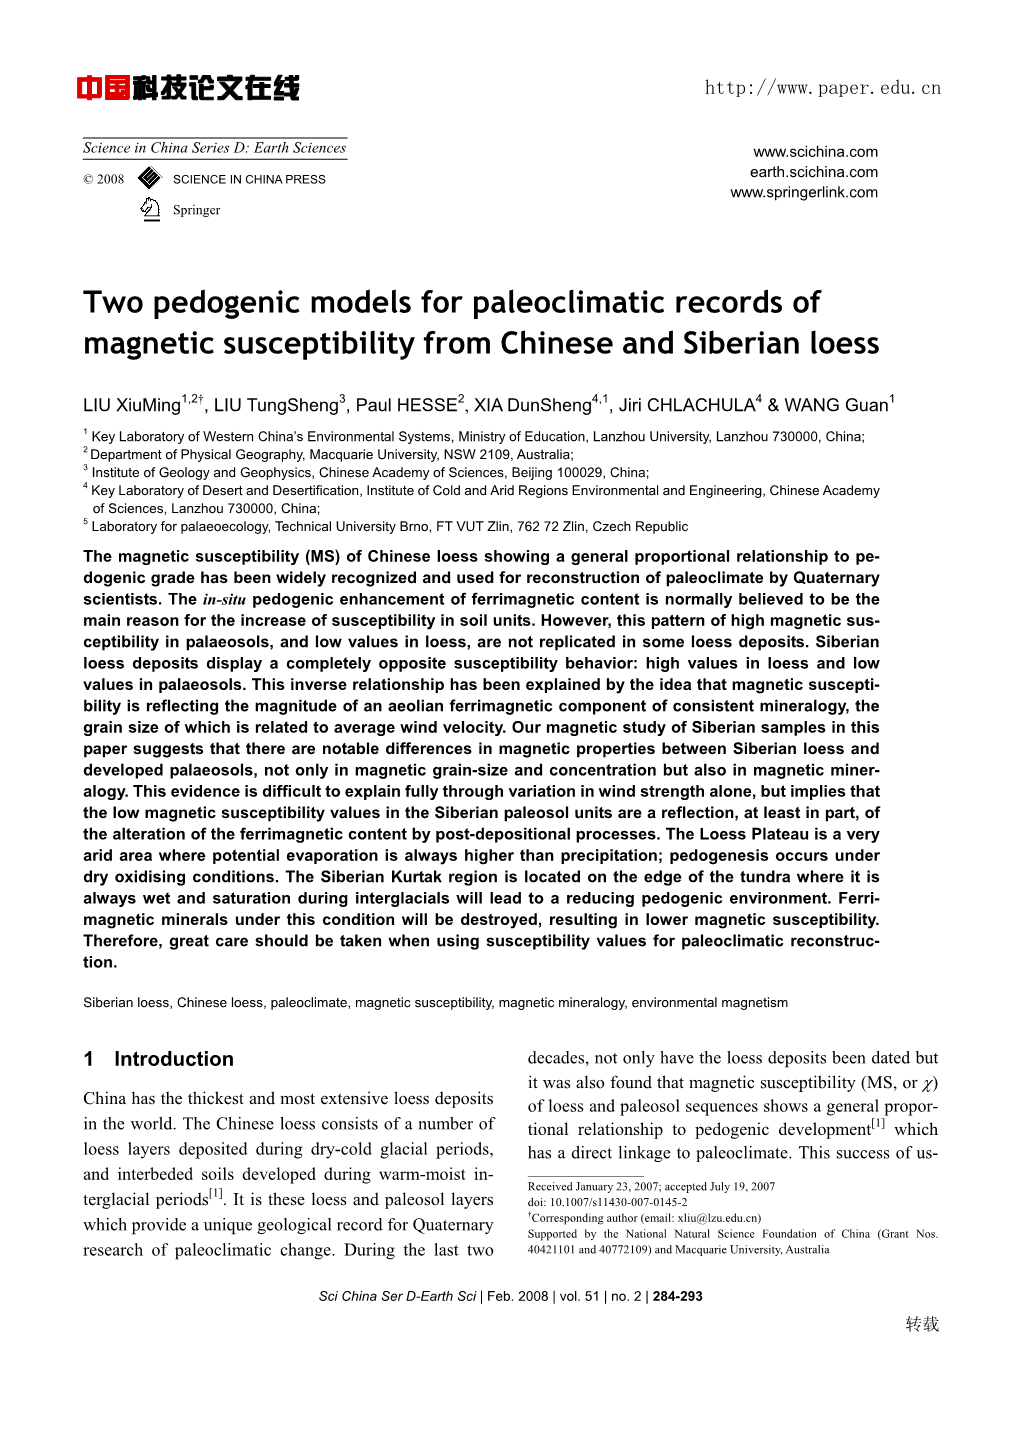 Two Pedogenic Models for Paleoclimatic Records of Magnetic Susceptibility from Chinese and Siberian Loess